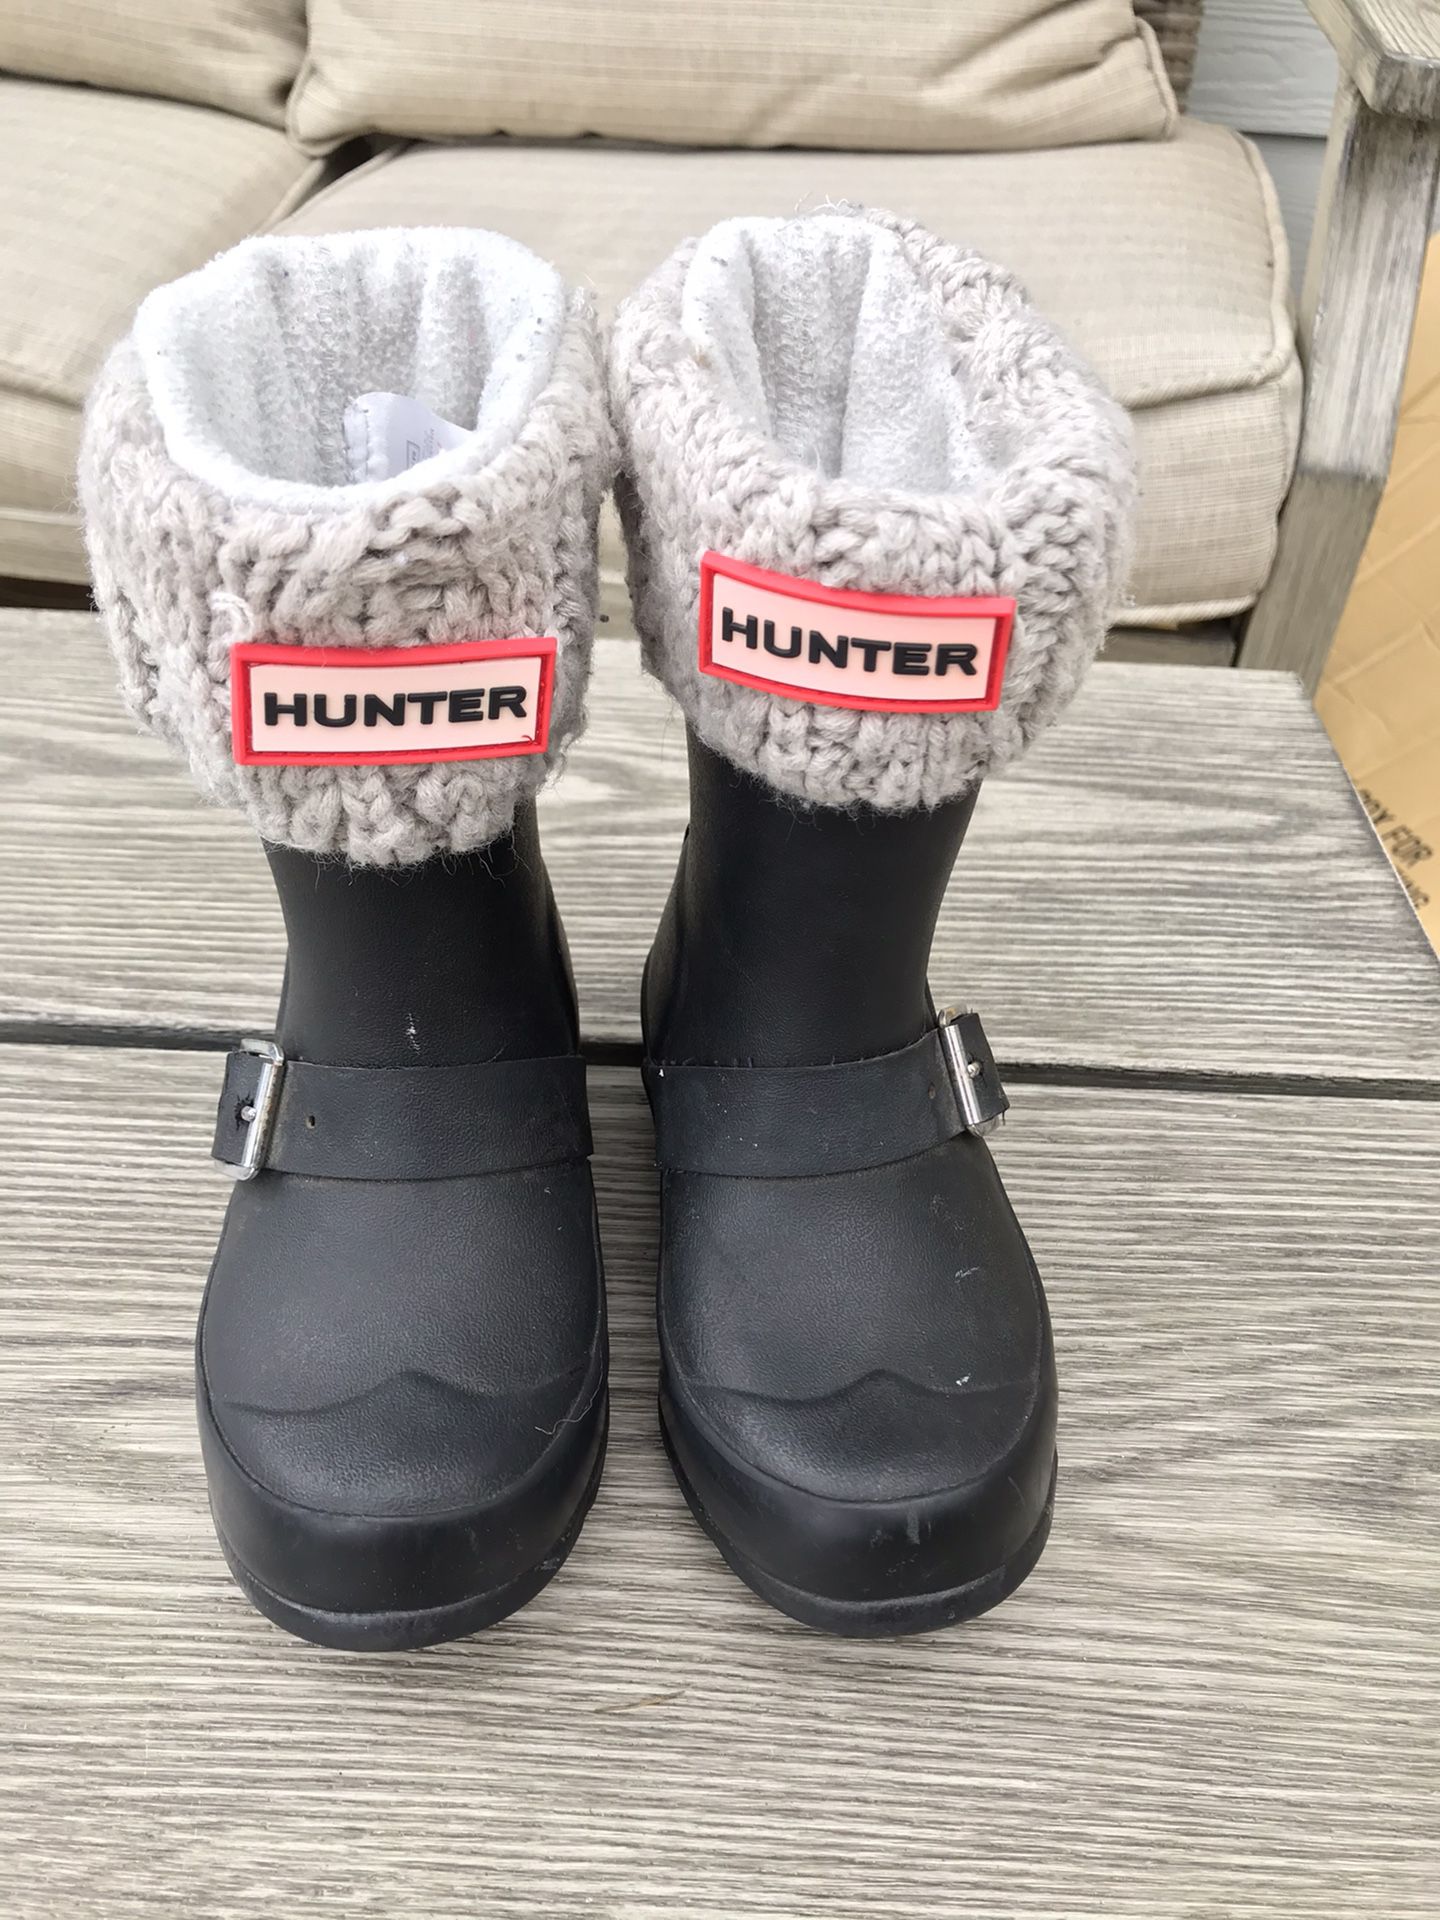 Toddler Hunter boots